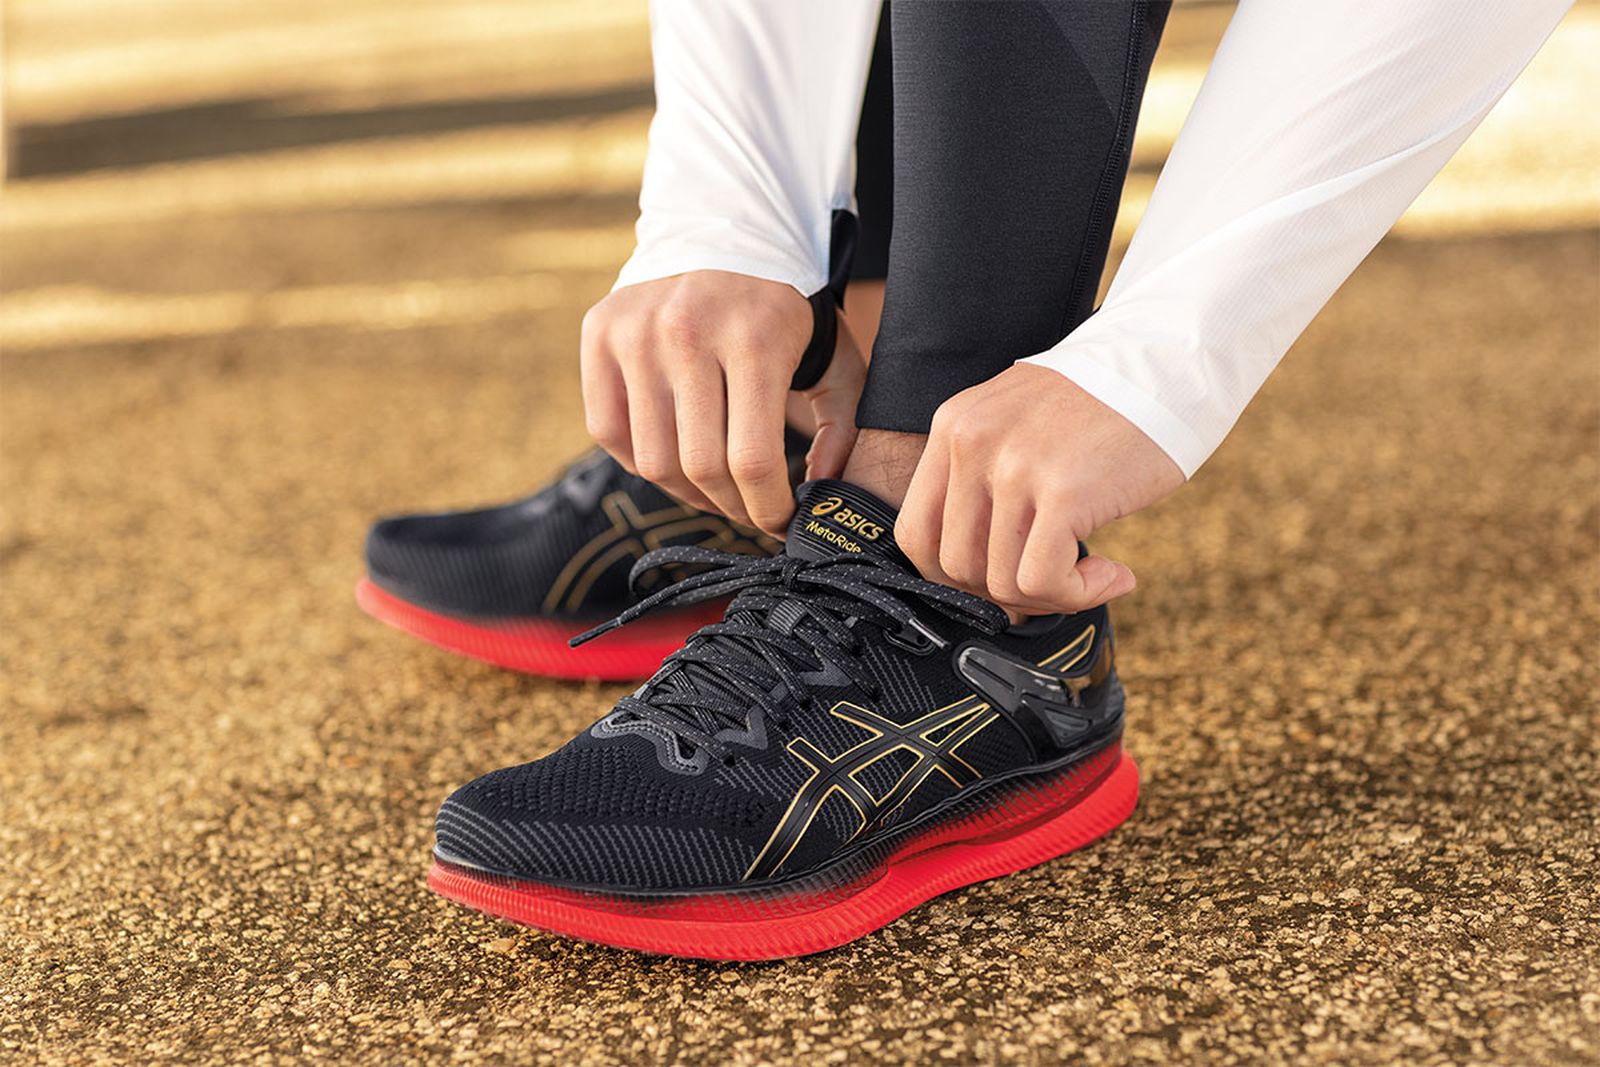 ASICS Unveils Its Most Advanced Running Shoe—the METARIDE